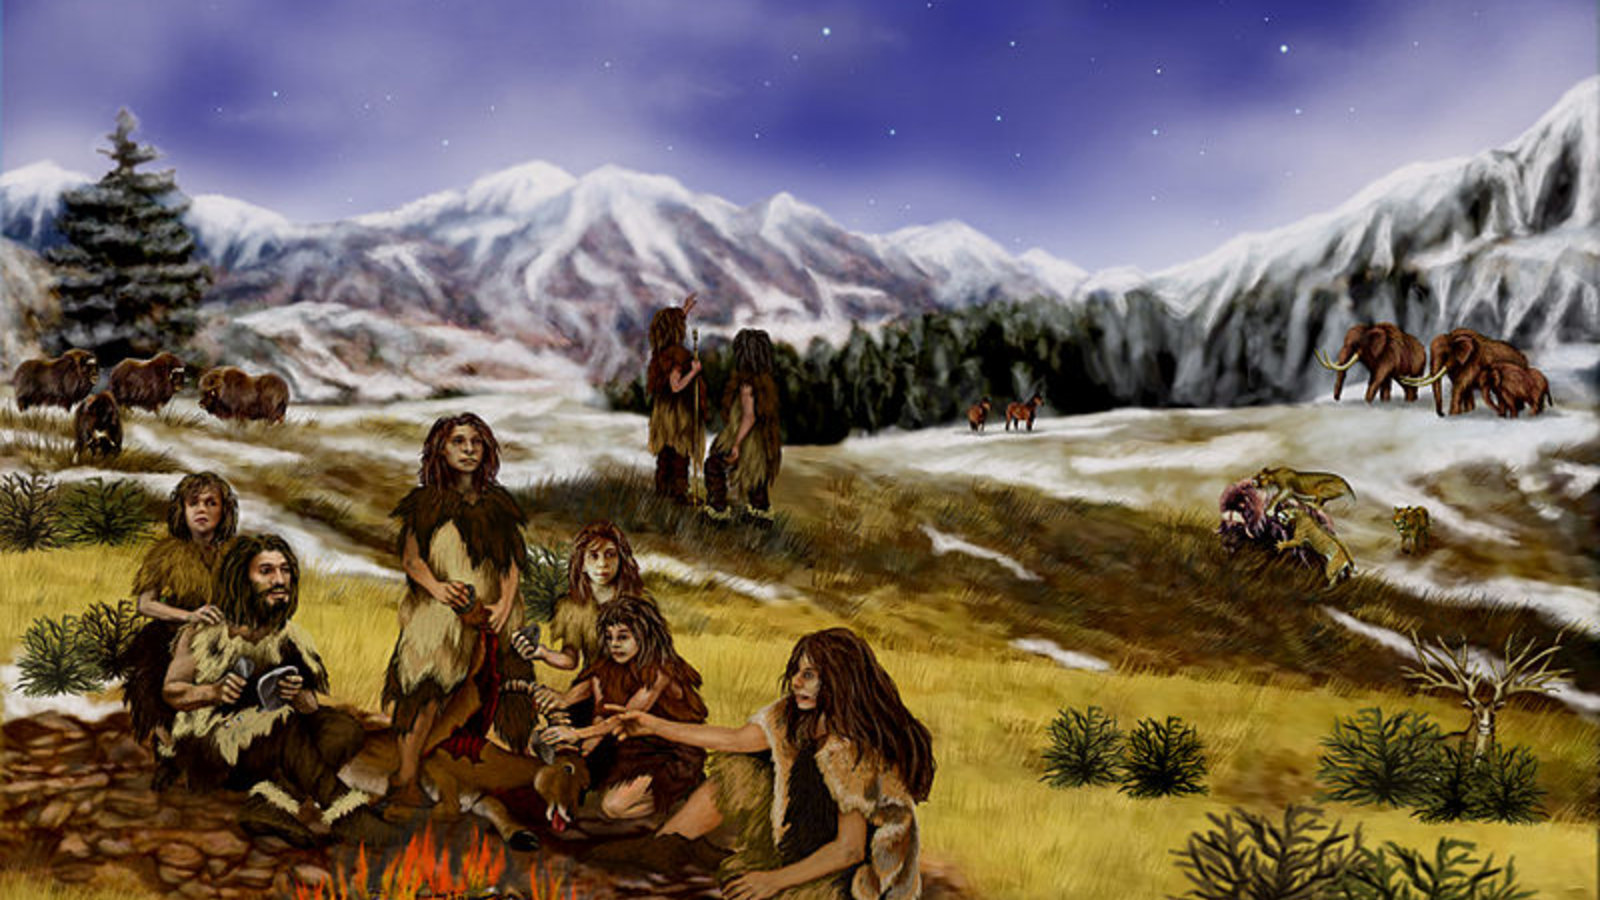 800px-neanderthals_-_artists_rendition_of_earth_approximately_60000_years_ago.jpg